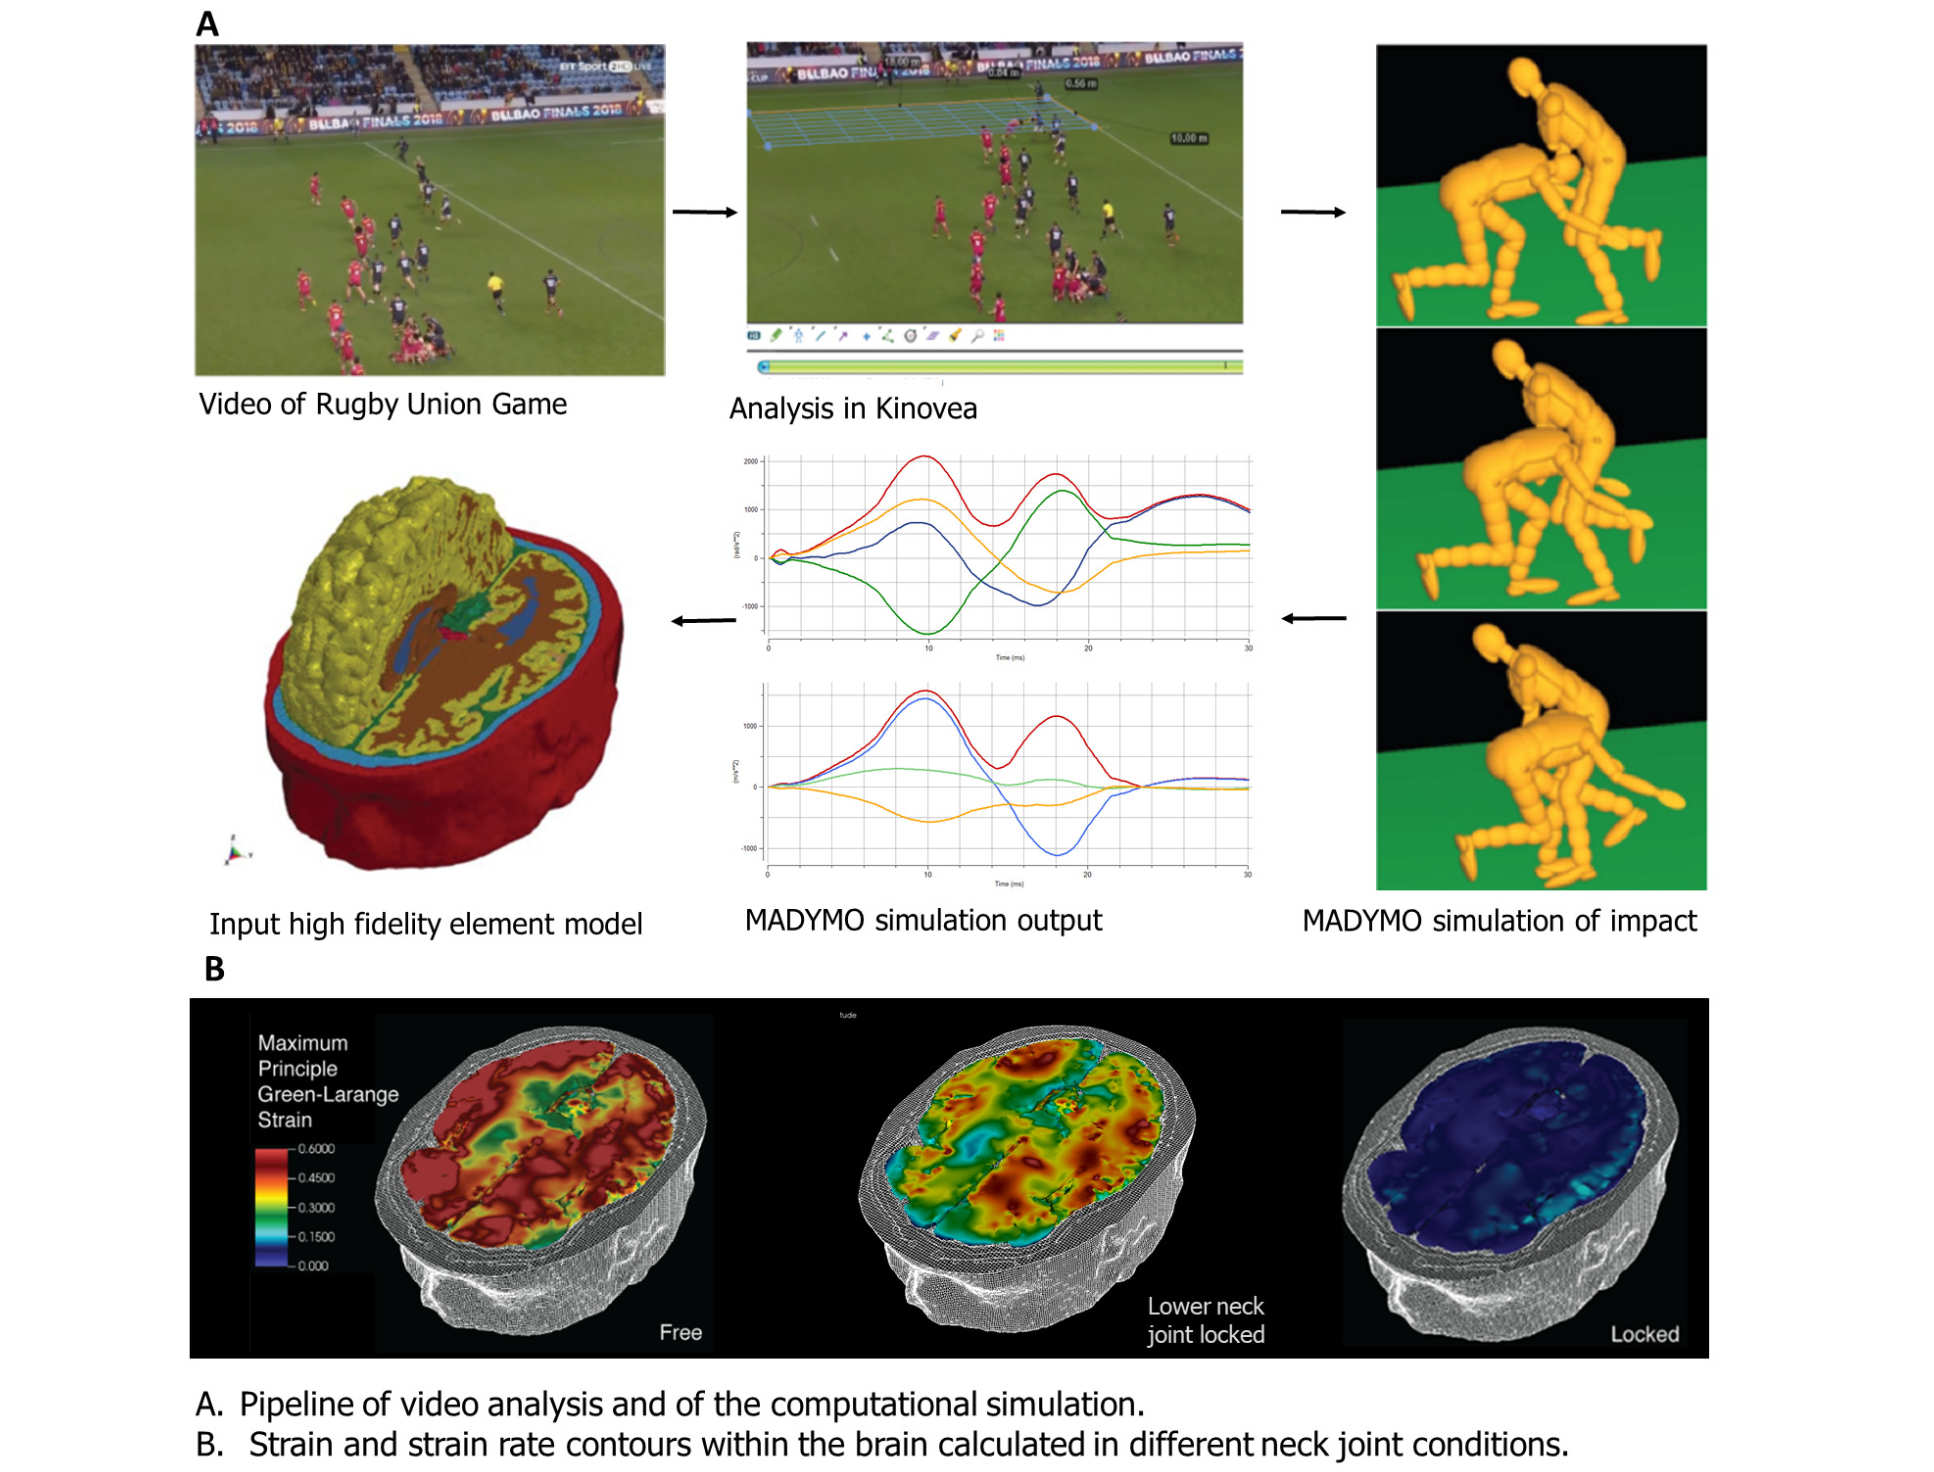 The pipeline of vieo analysis and of the computation simulation of rugby tackles, and the Strain and Strain rate contours within the brain calculated in different neck joint conditions.